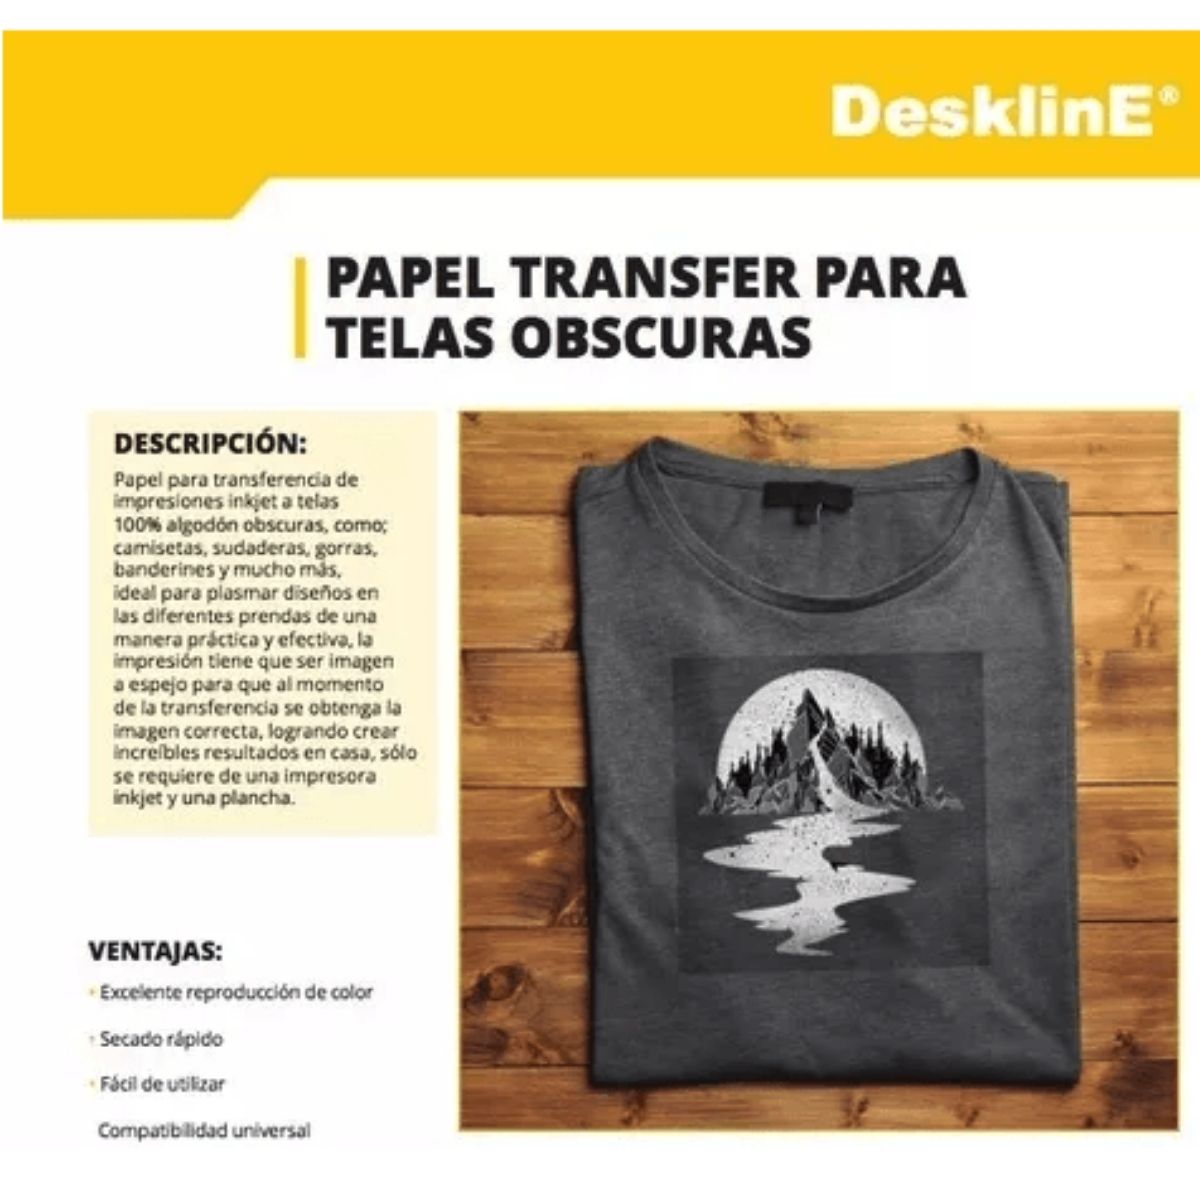 Papel Transfer Obscuro Tr305 10 pack Kronaline Telas Oscuras - MarchanteMX